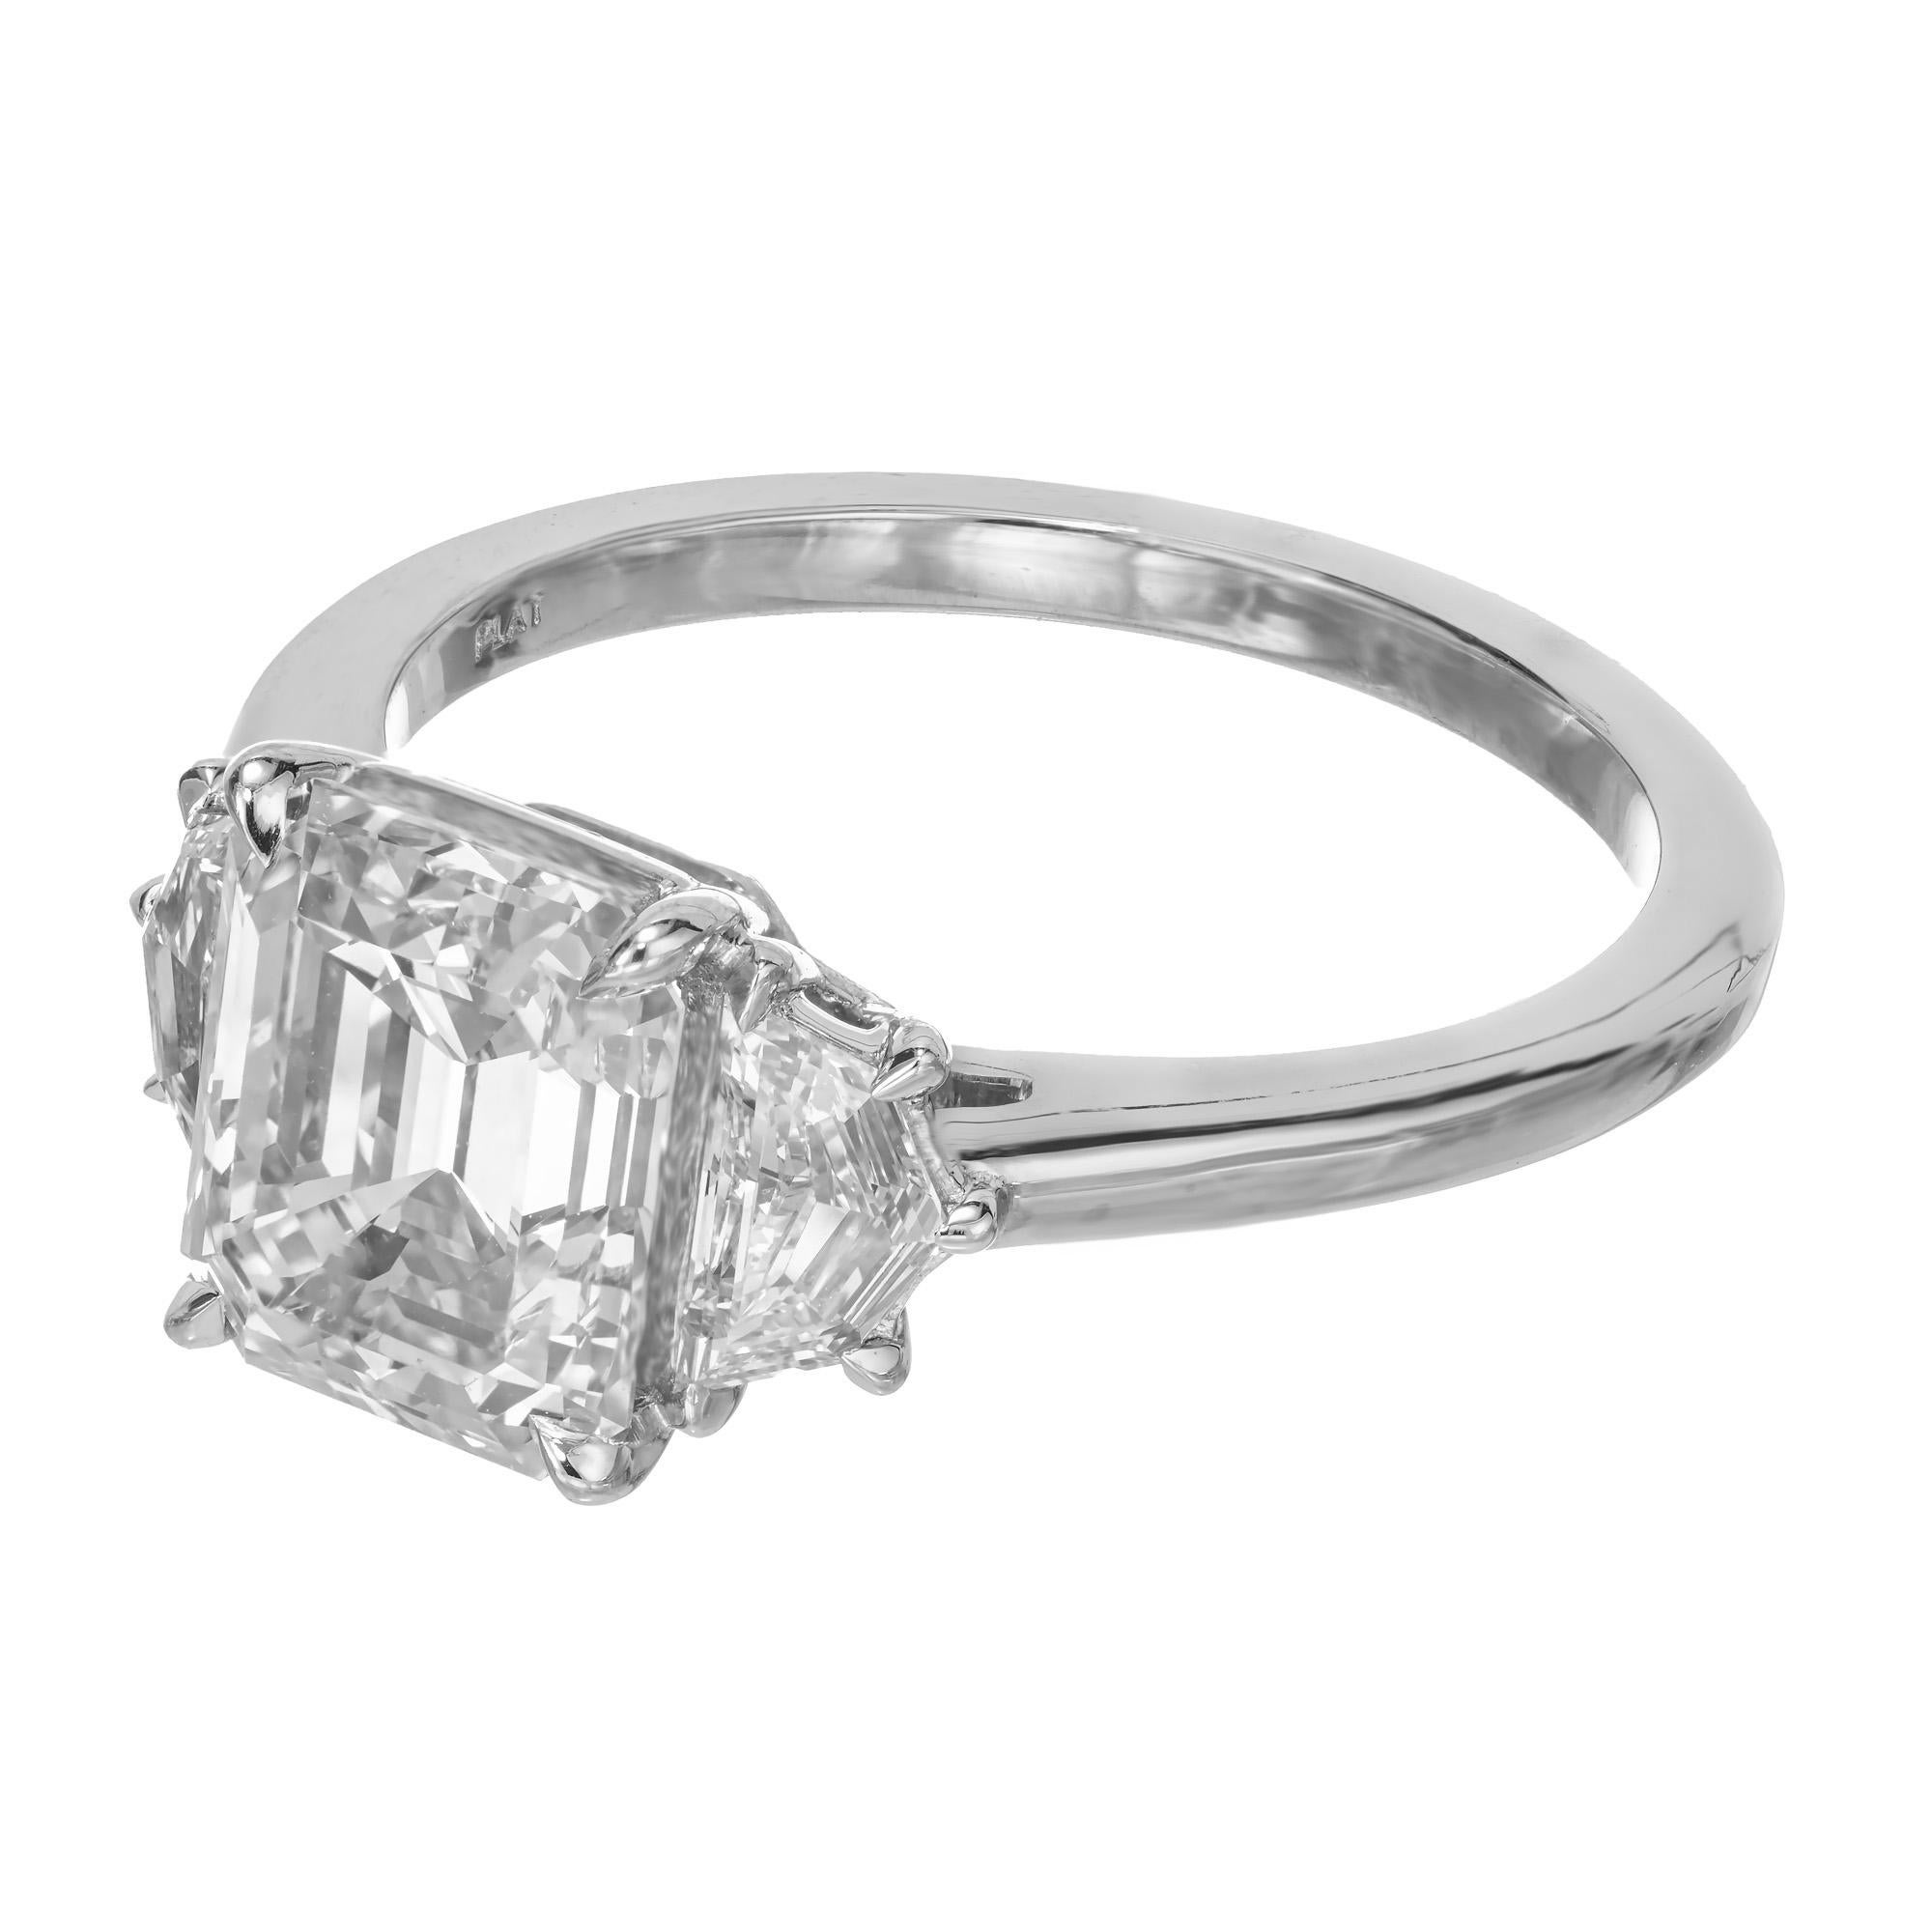 Emerald Cut Peter Suchy GIA Certified 2.32 Carat Diamond Platinum Ring For Sale